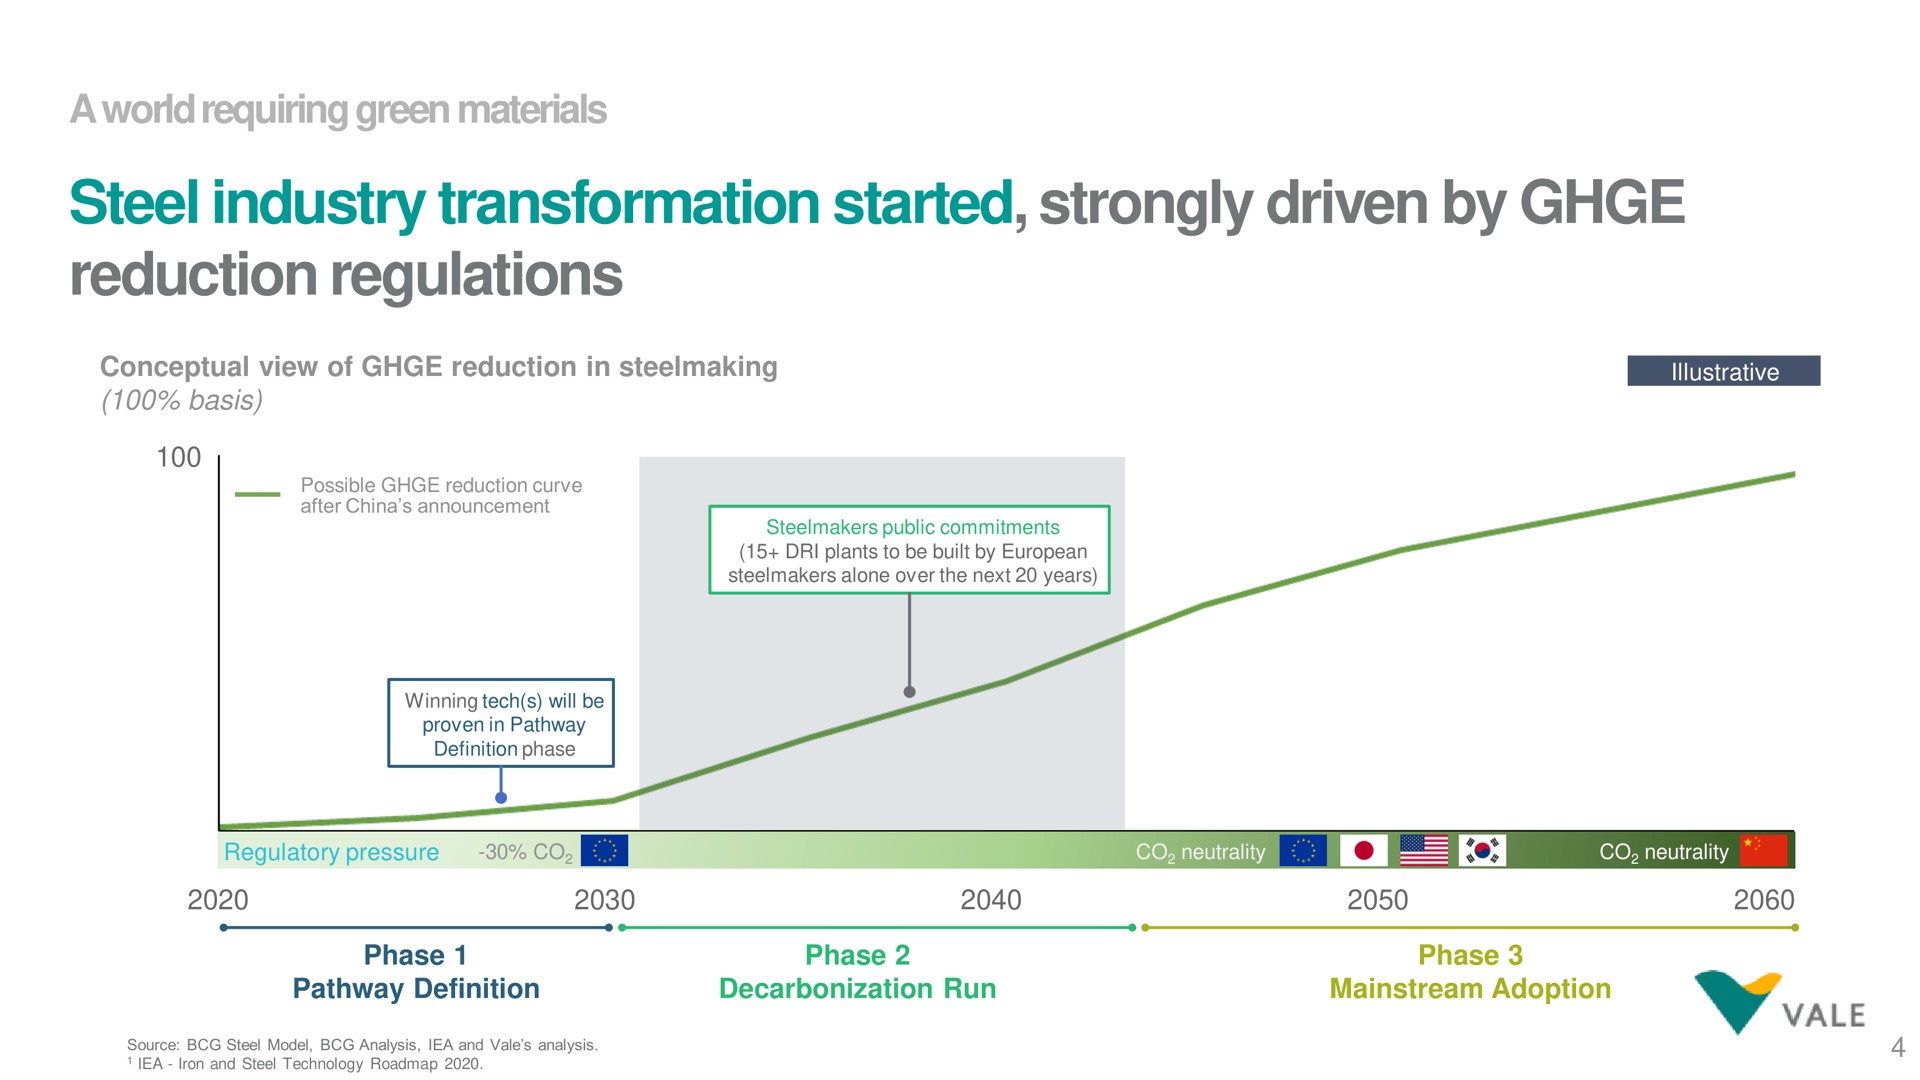 steel industry transformation started strongly driven by reduction regulations requiring green materials | Vale